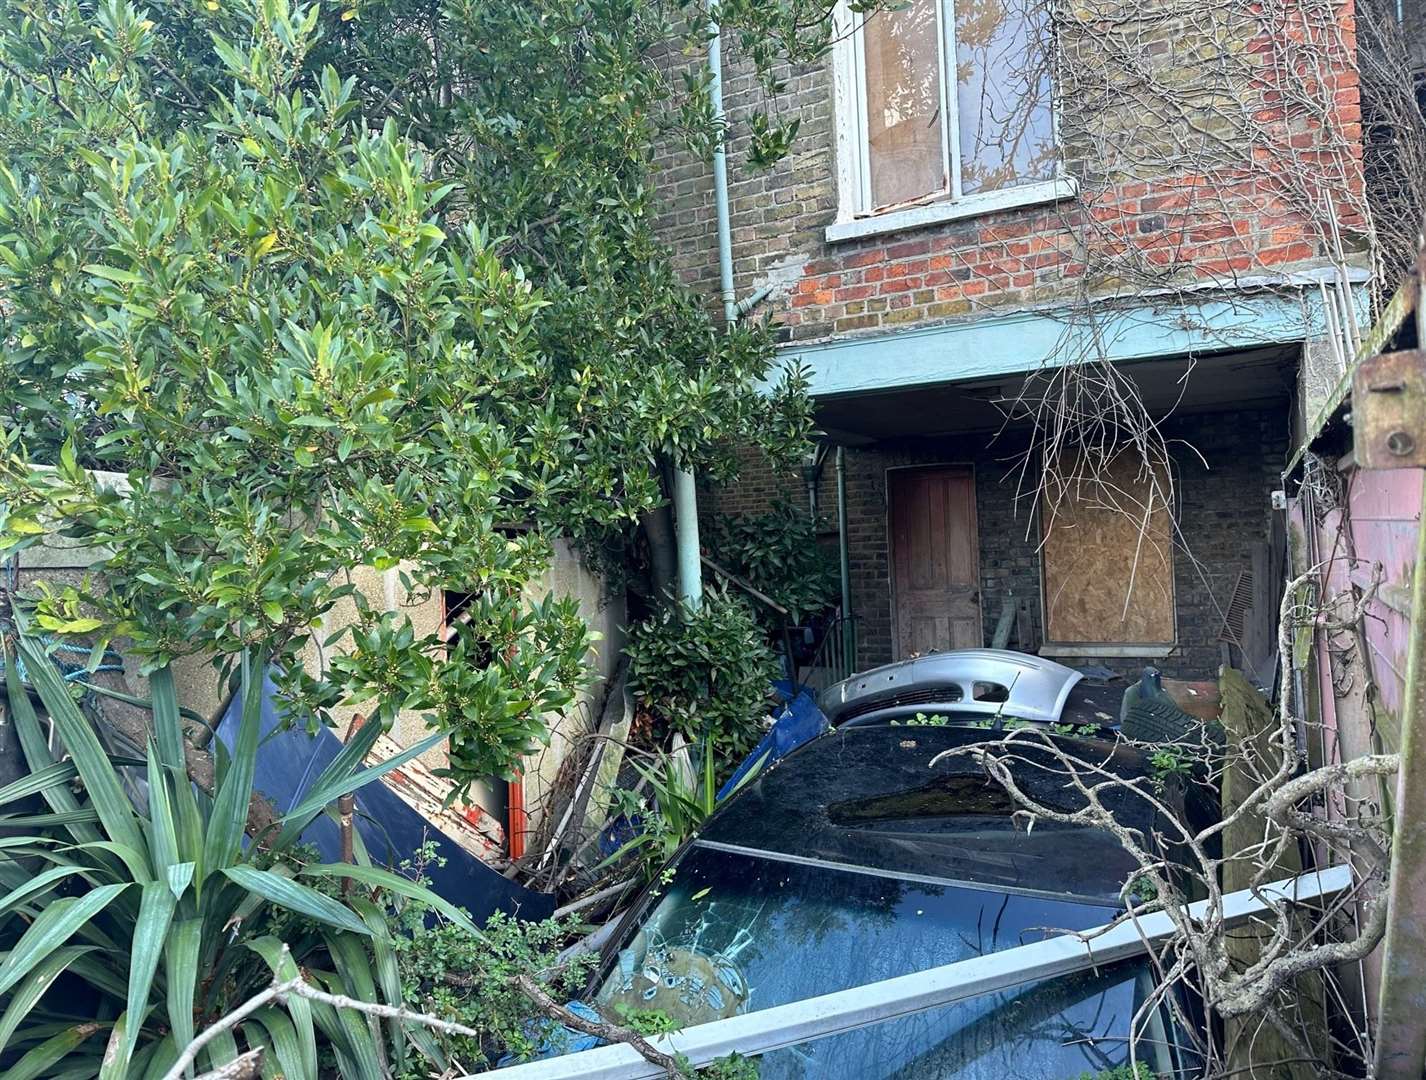 An unrecognisable car in the garden. Picture: Taylor James Auctions